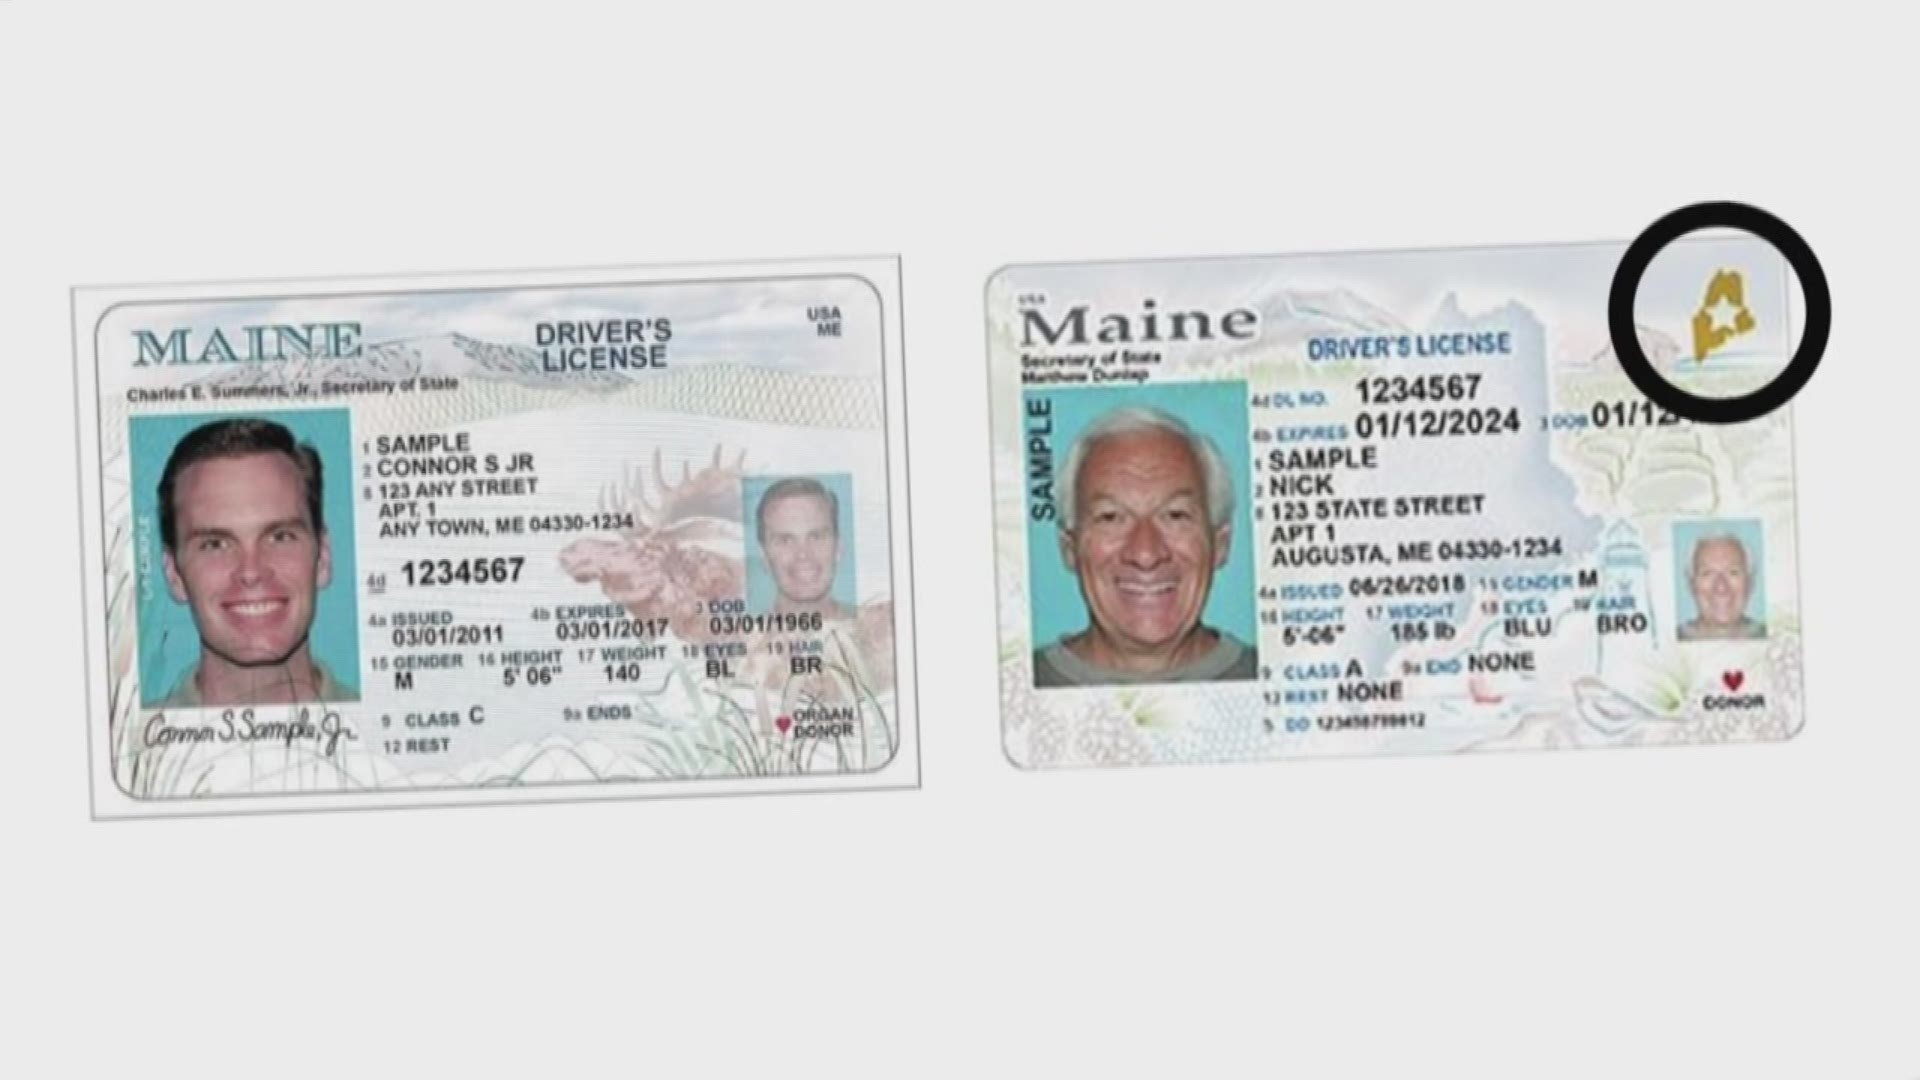 By October 2020 if you opt out of the Real ID, using your driver's license for identification will no longer be sufficient for boarding a plane or entering secure federal buildings.